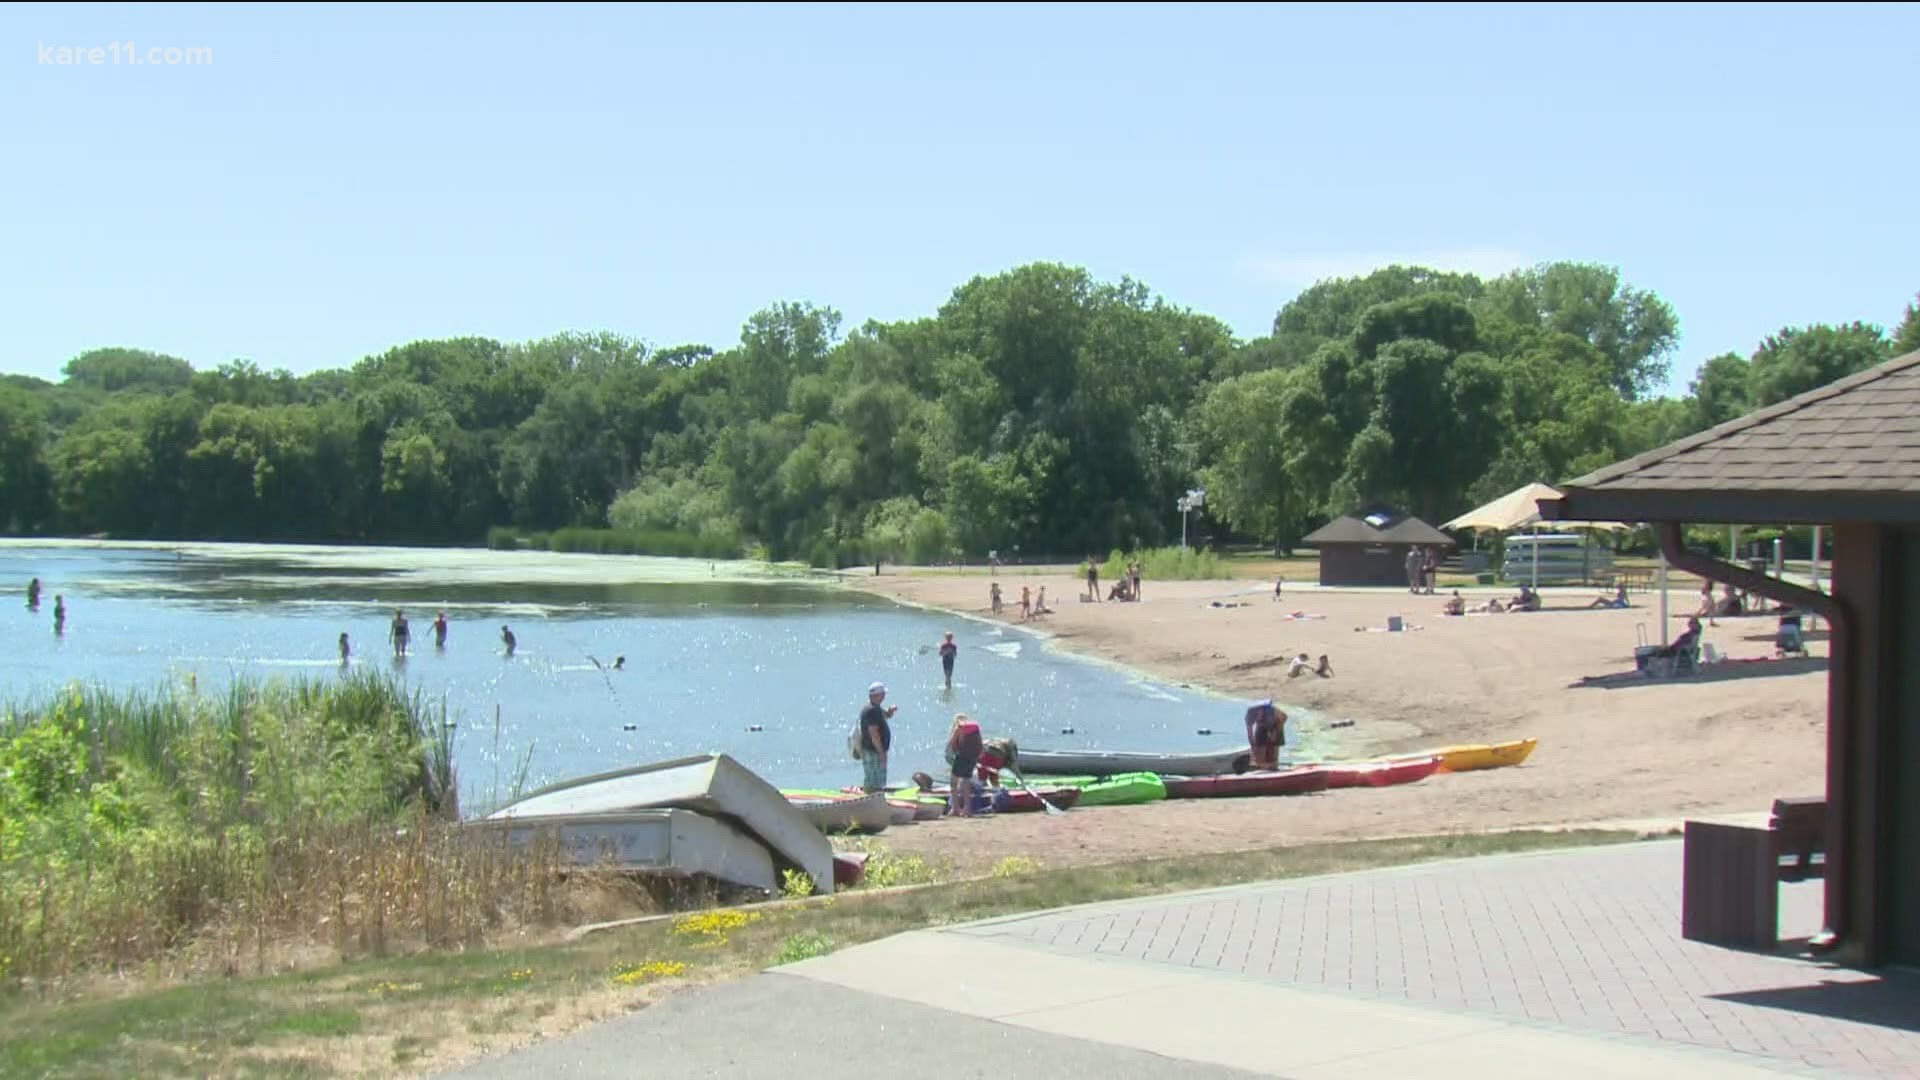 As of June 14, Hennepin Healthcare says there have been at least 25 drownings in Minnesota. The DNR says boating deaths are up, as well